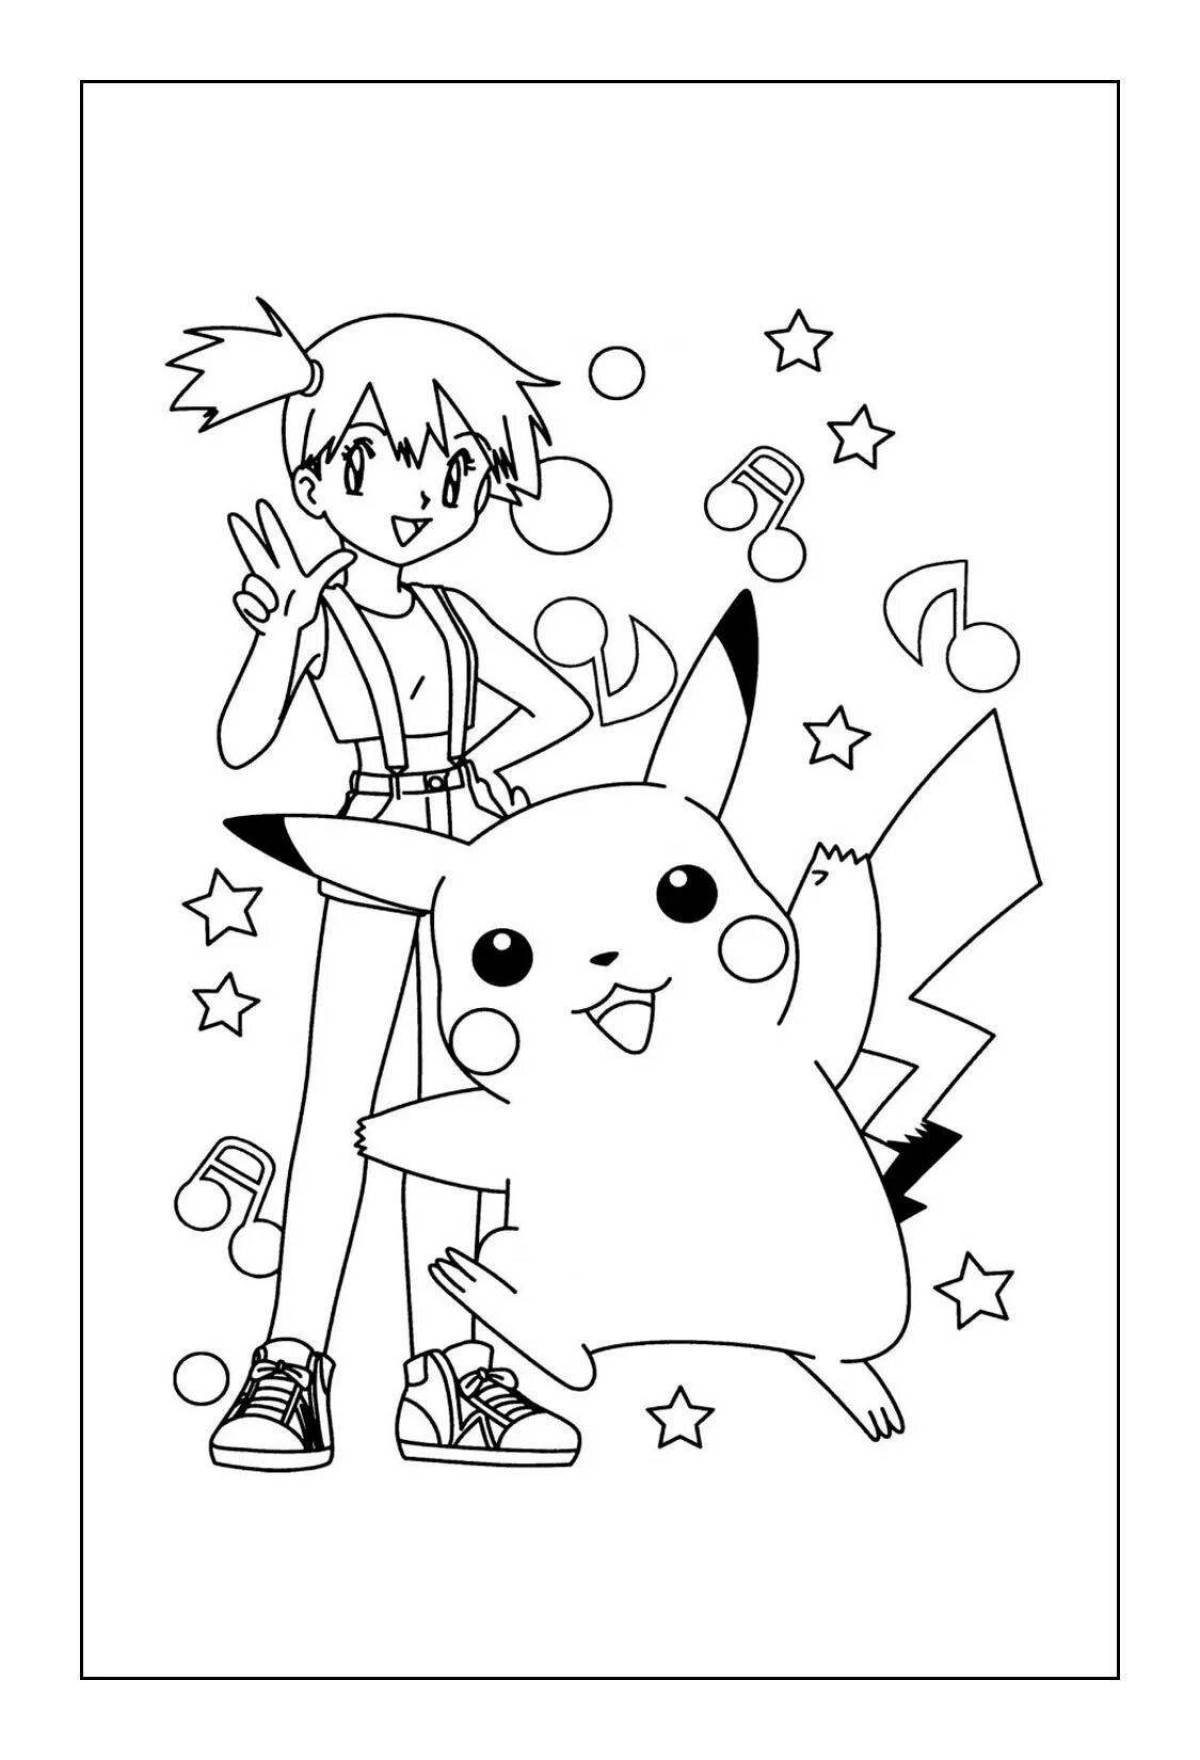 Animated coloring book of a girl in a pikachu costume